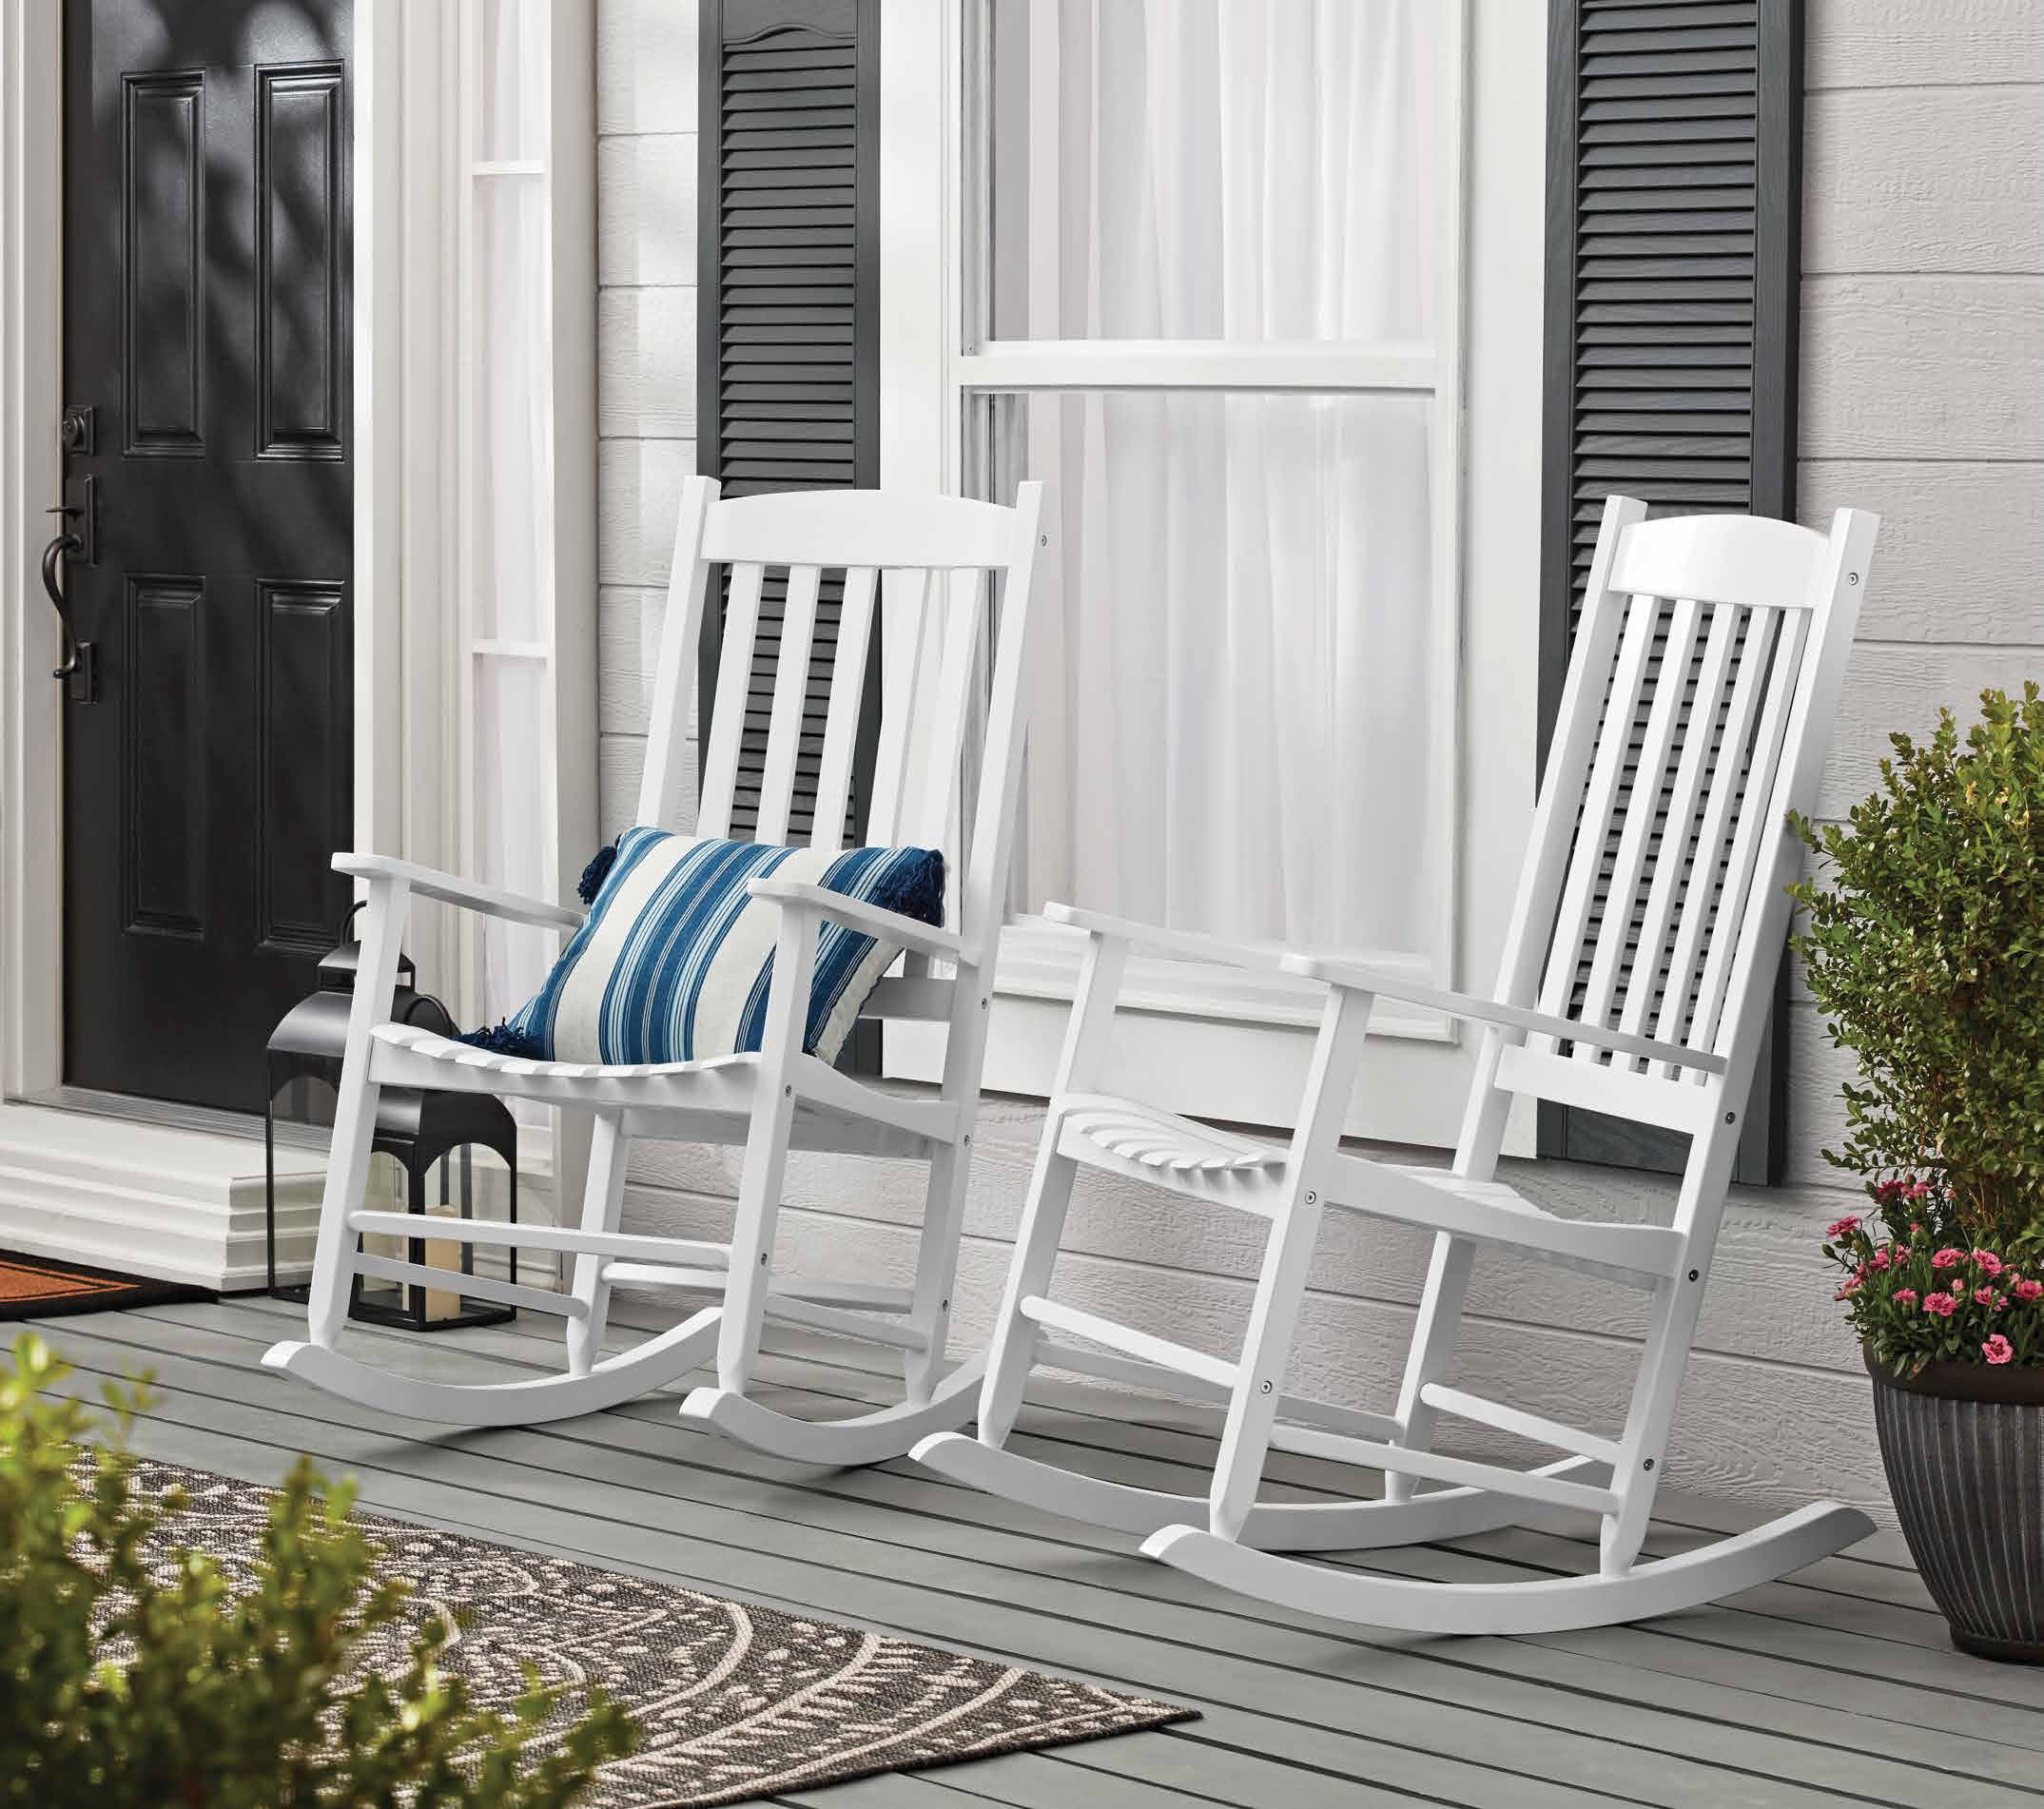 SUNBRANO Wooden Rocking Chair White Classic Outdoor and Indoor Porch All-Weather Rocker with 352 lbs Duty Rating for Patio Garden Balcony and Living Rooms